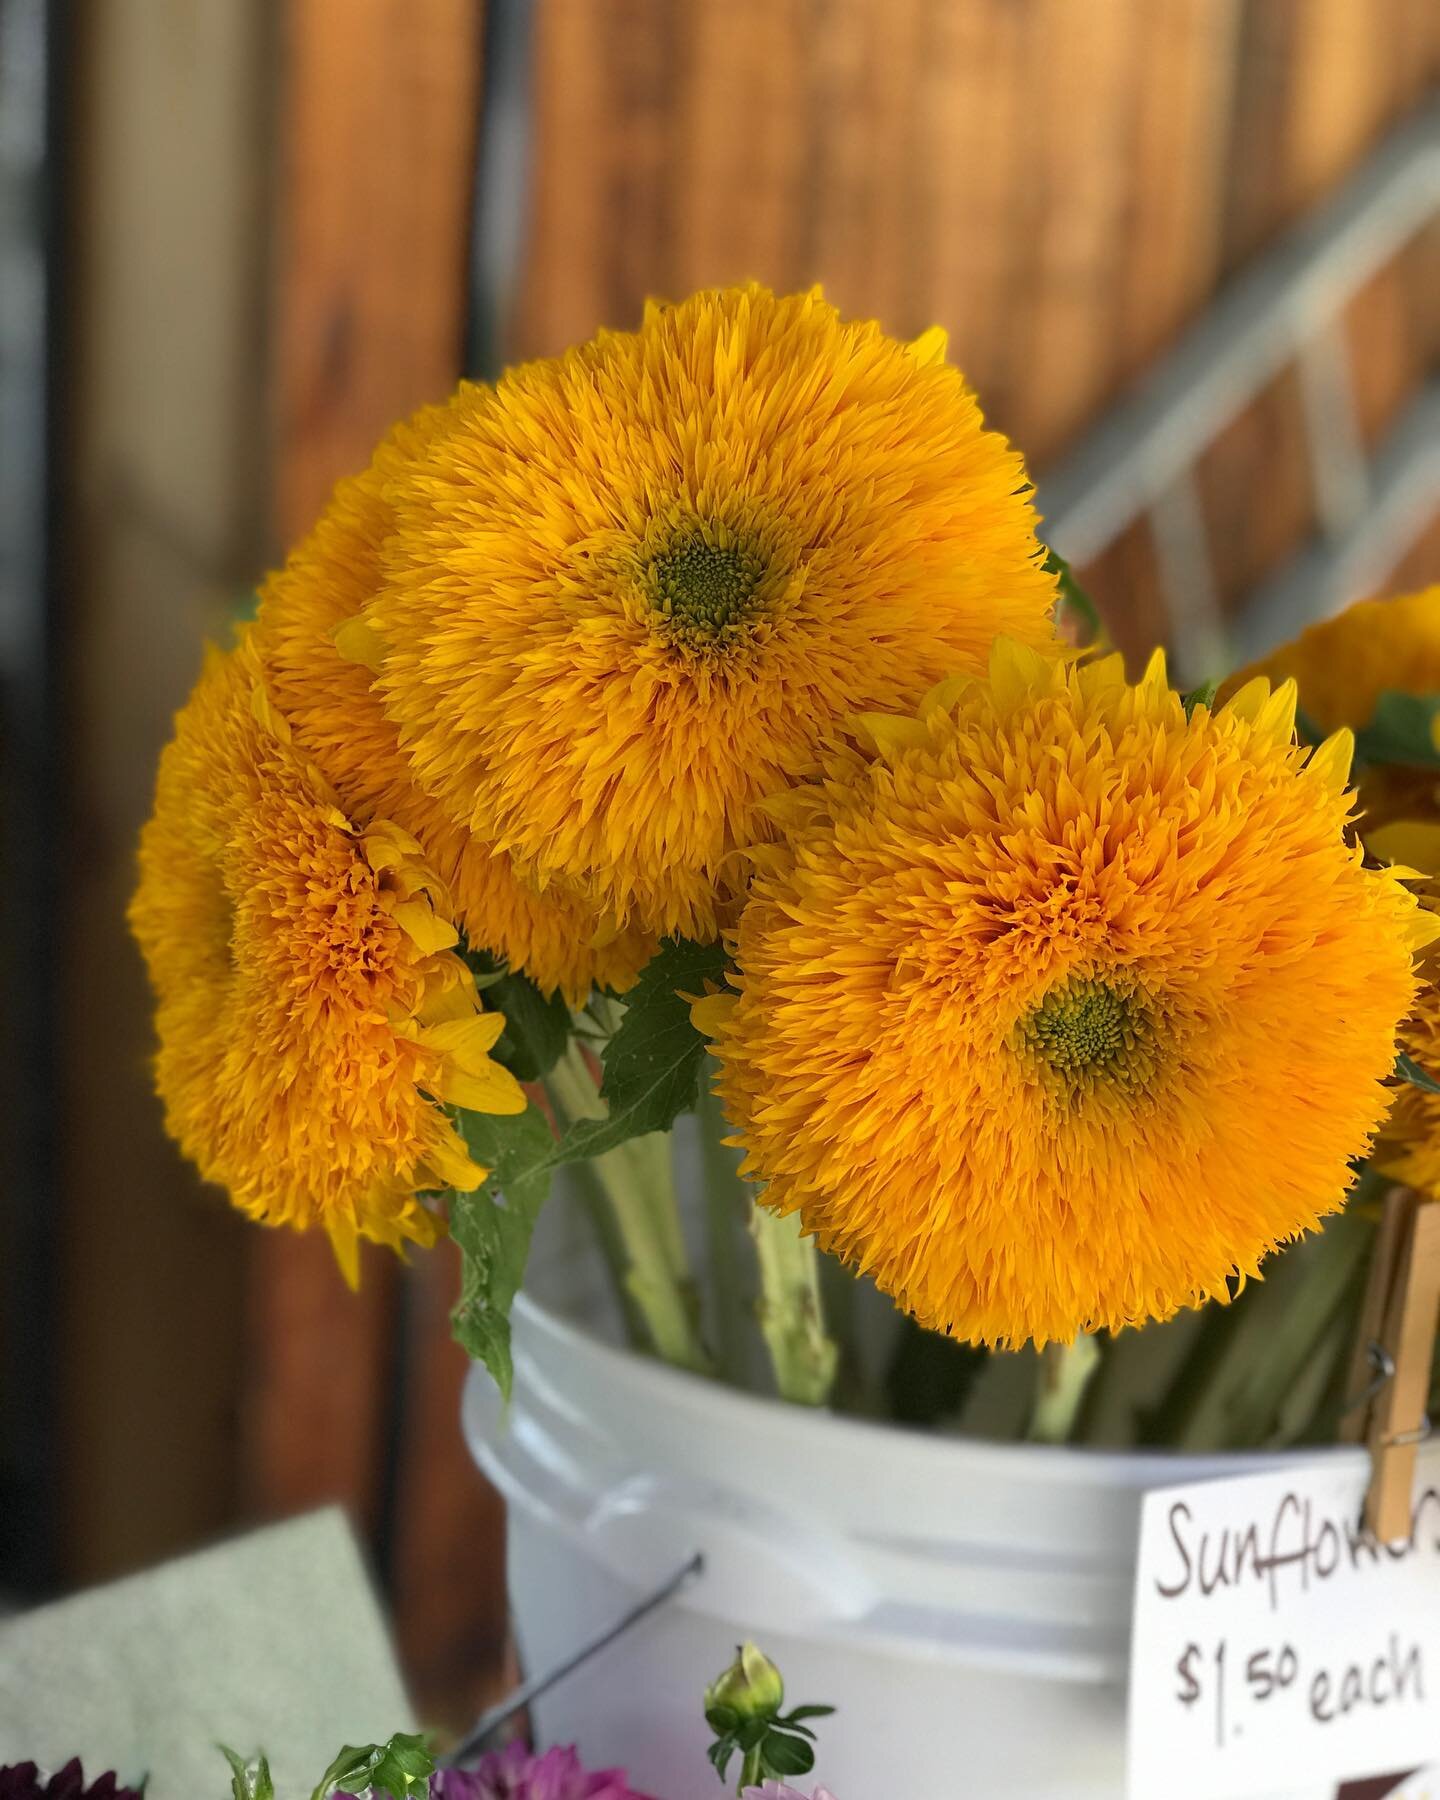 SUNFLOWERS... they&rsquo;re the ultimate summer flower 🌻Found these Teddy Bear types today @unityfarmvt and combined with a couple stems of Sundancer which I grew from seed from @reneesgardenseeds. I like the combination, what do you think? #sunflow